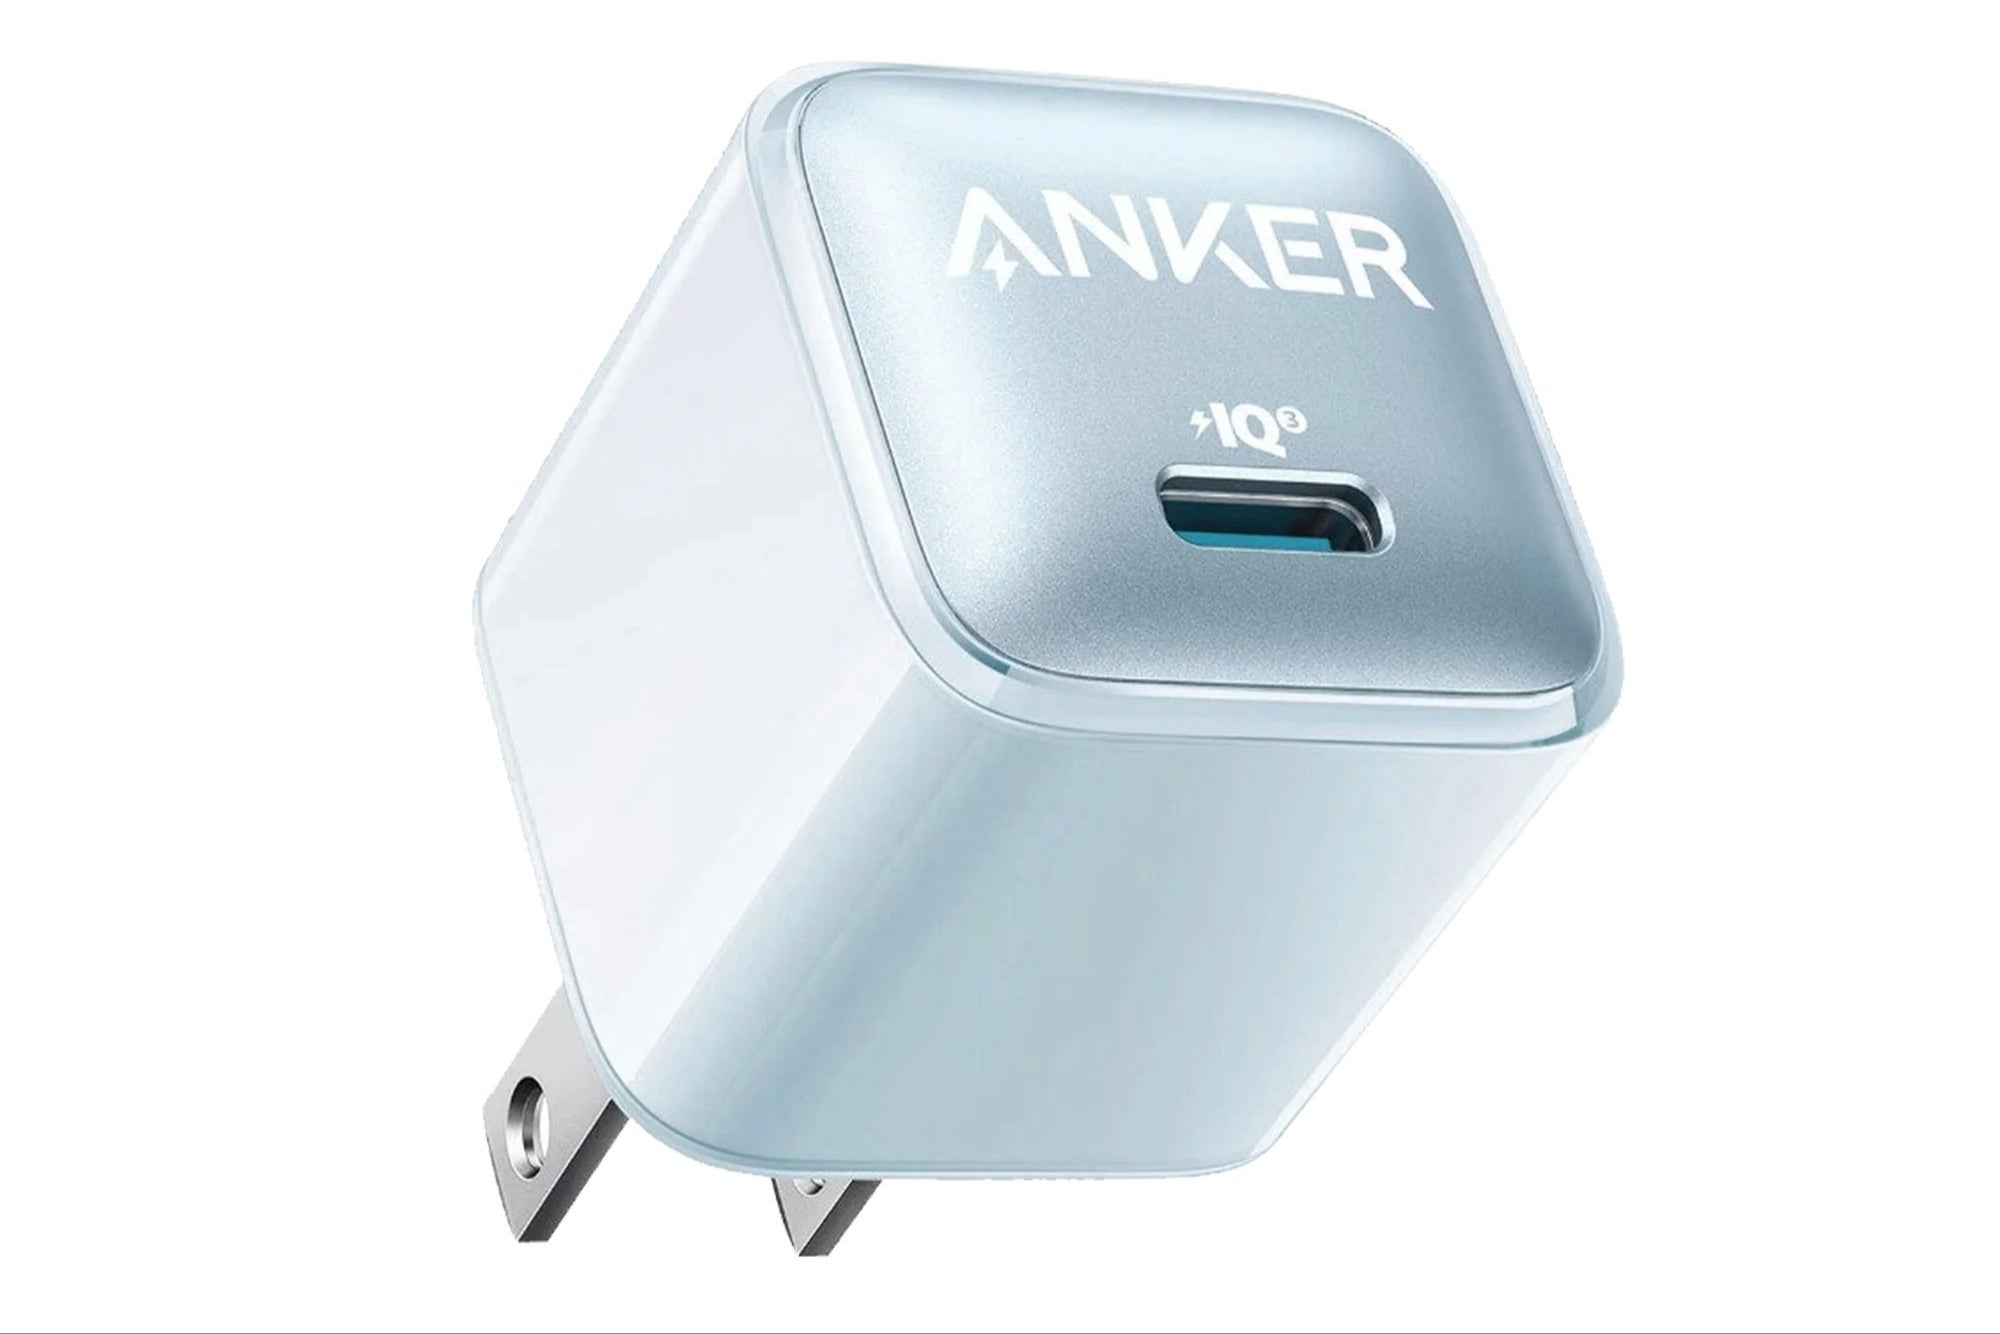 Anker 511 Nano Charger (Image credit – Anker) – Wait, does Ikea sell Apple and Samsung's expensive power adapters?